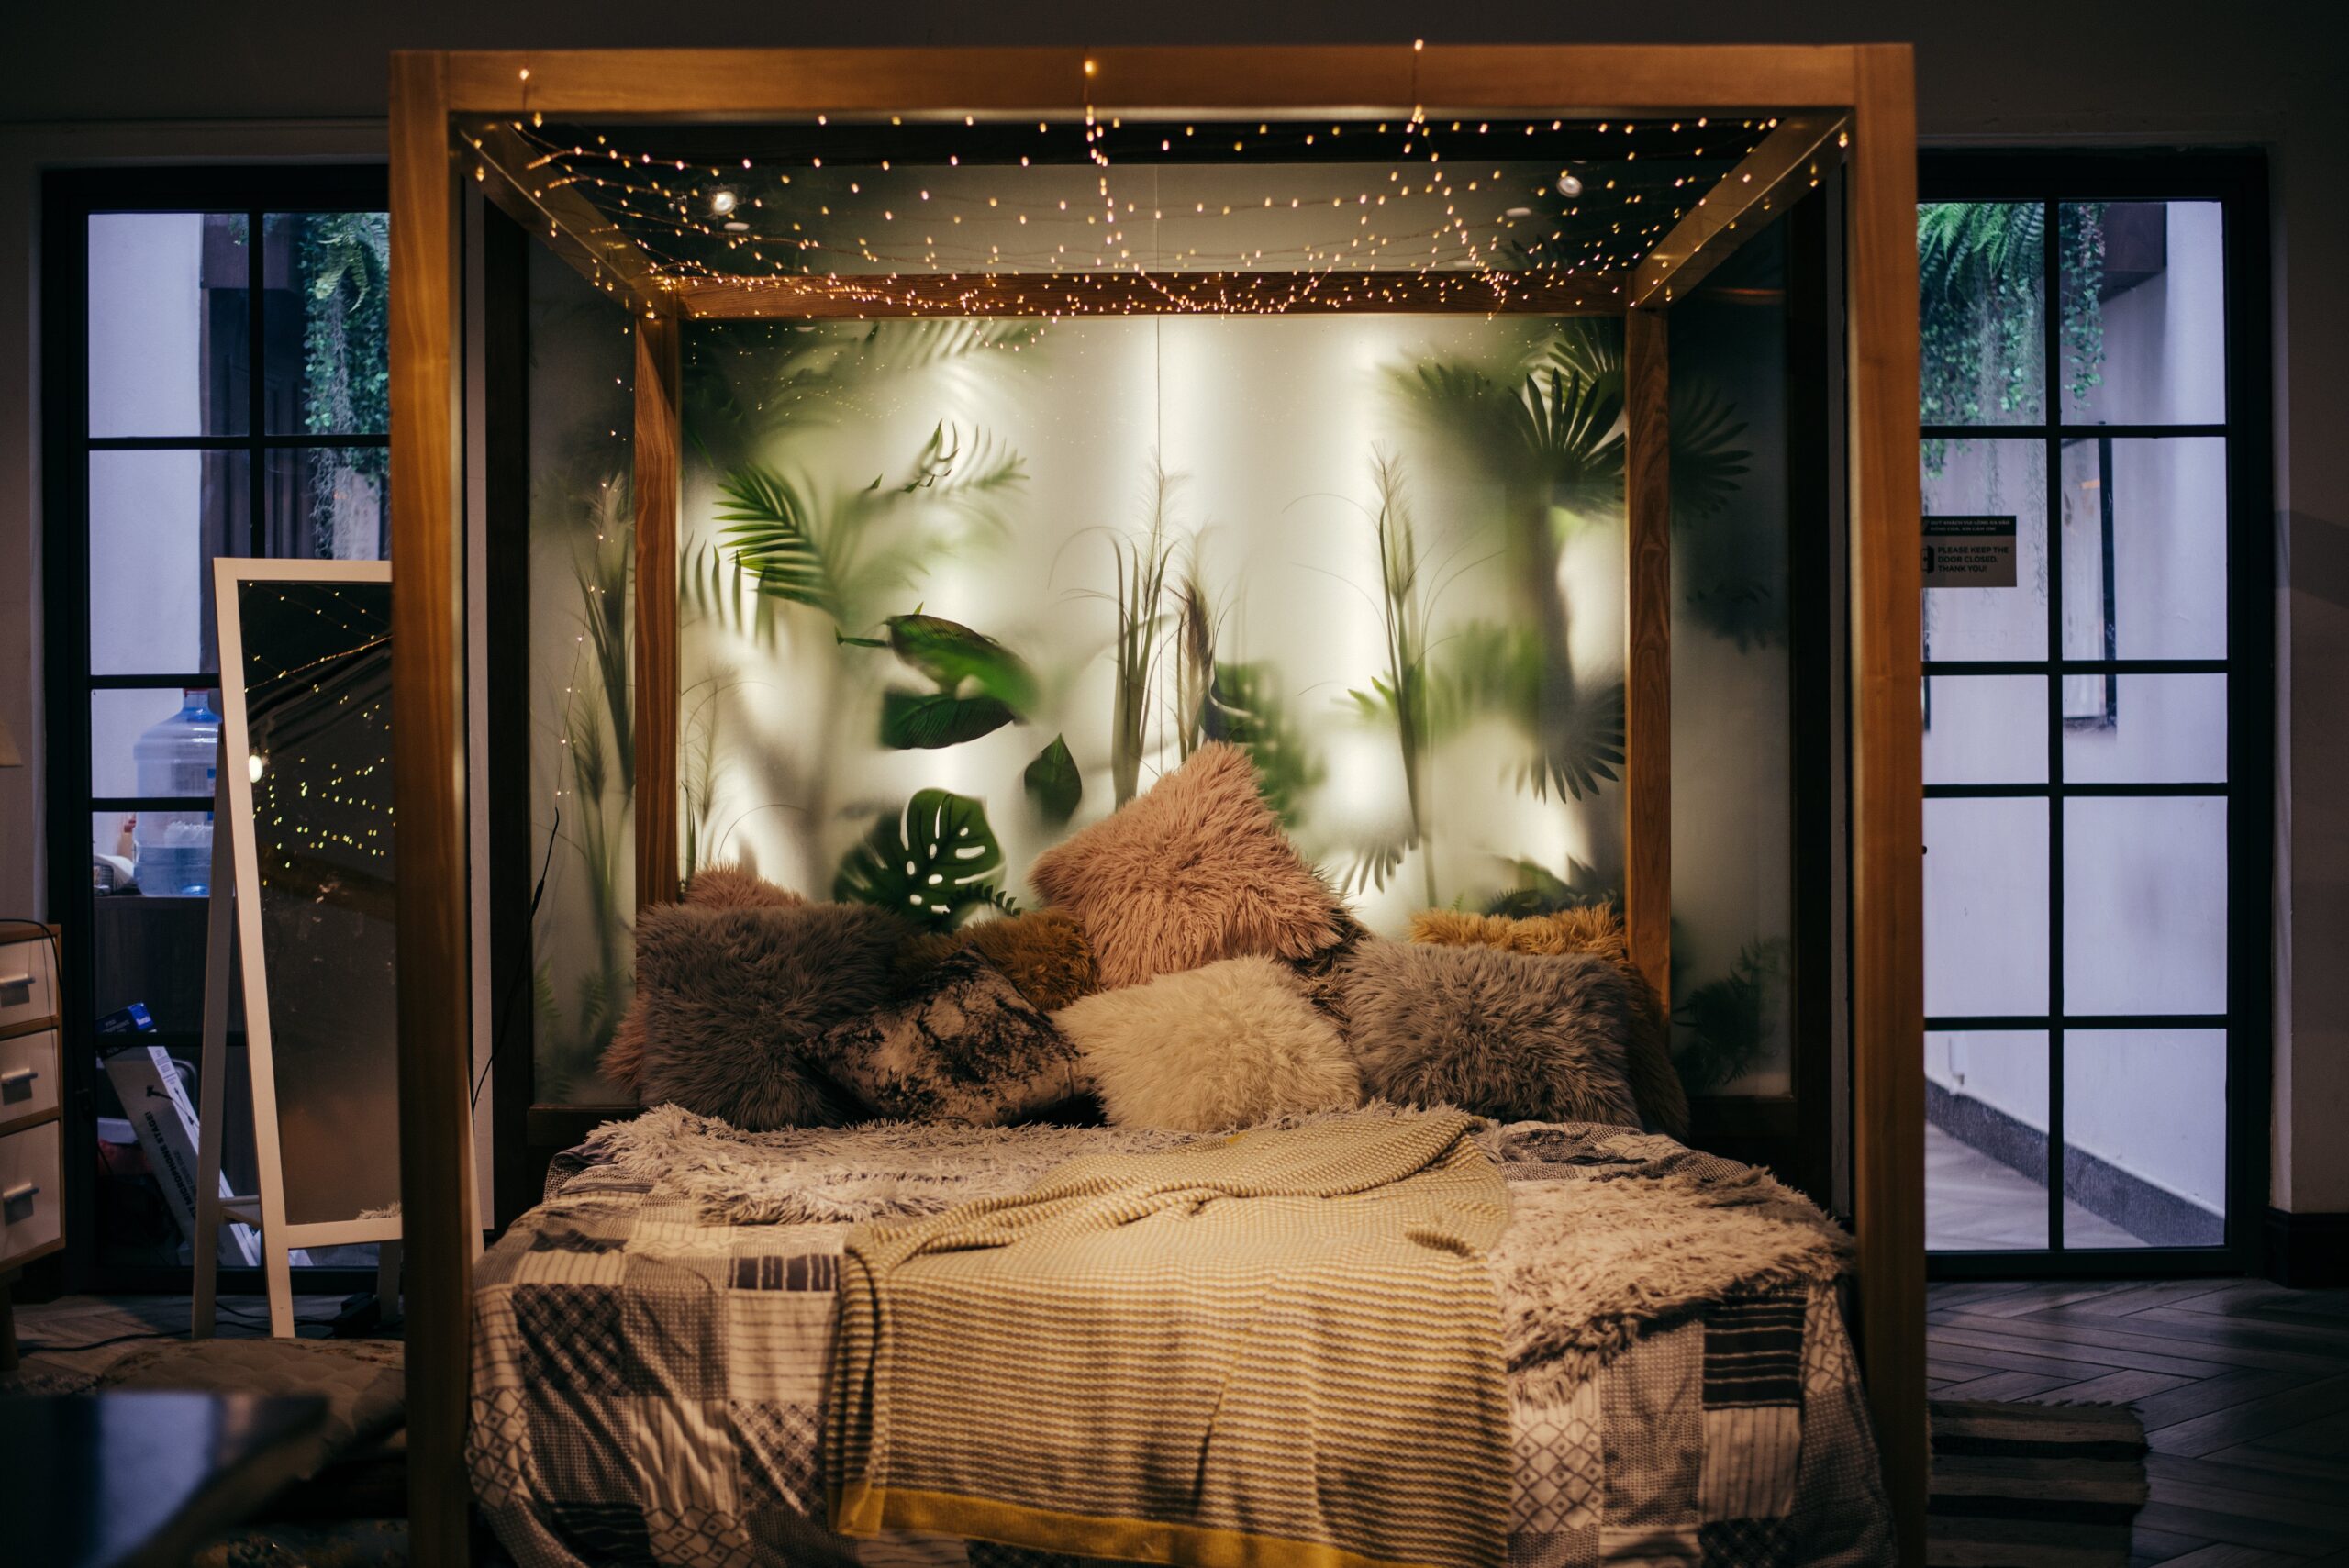 Turn your hobo bedroom into a tropical oasis with leaves, flamingo decor, and shades of green. Pictured: A boho bedroom with tropical leaves in the background.